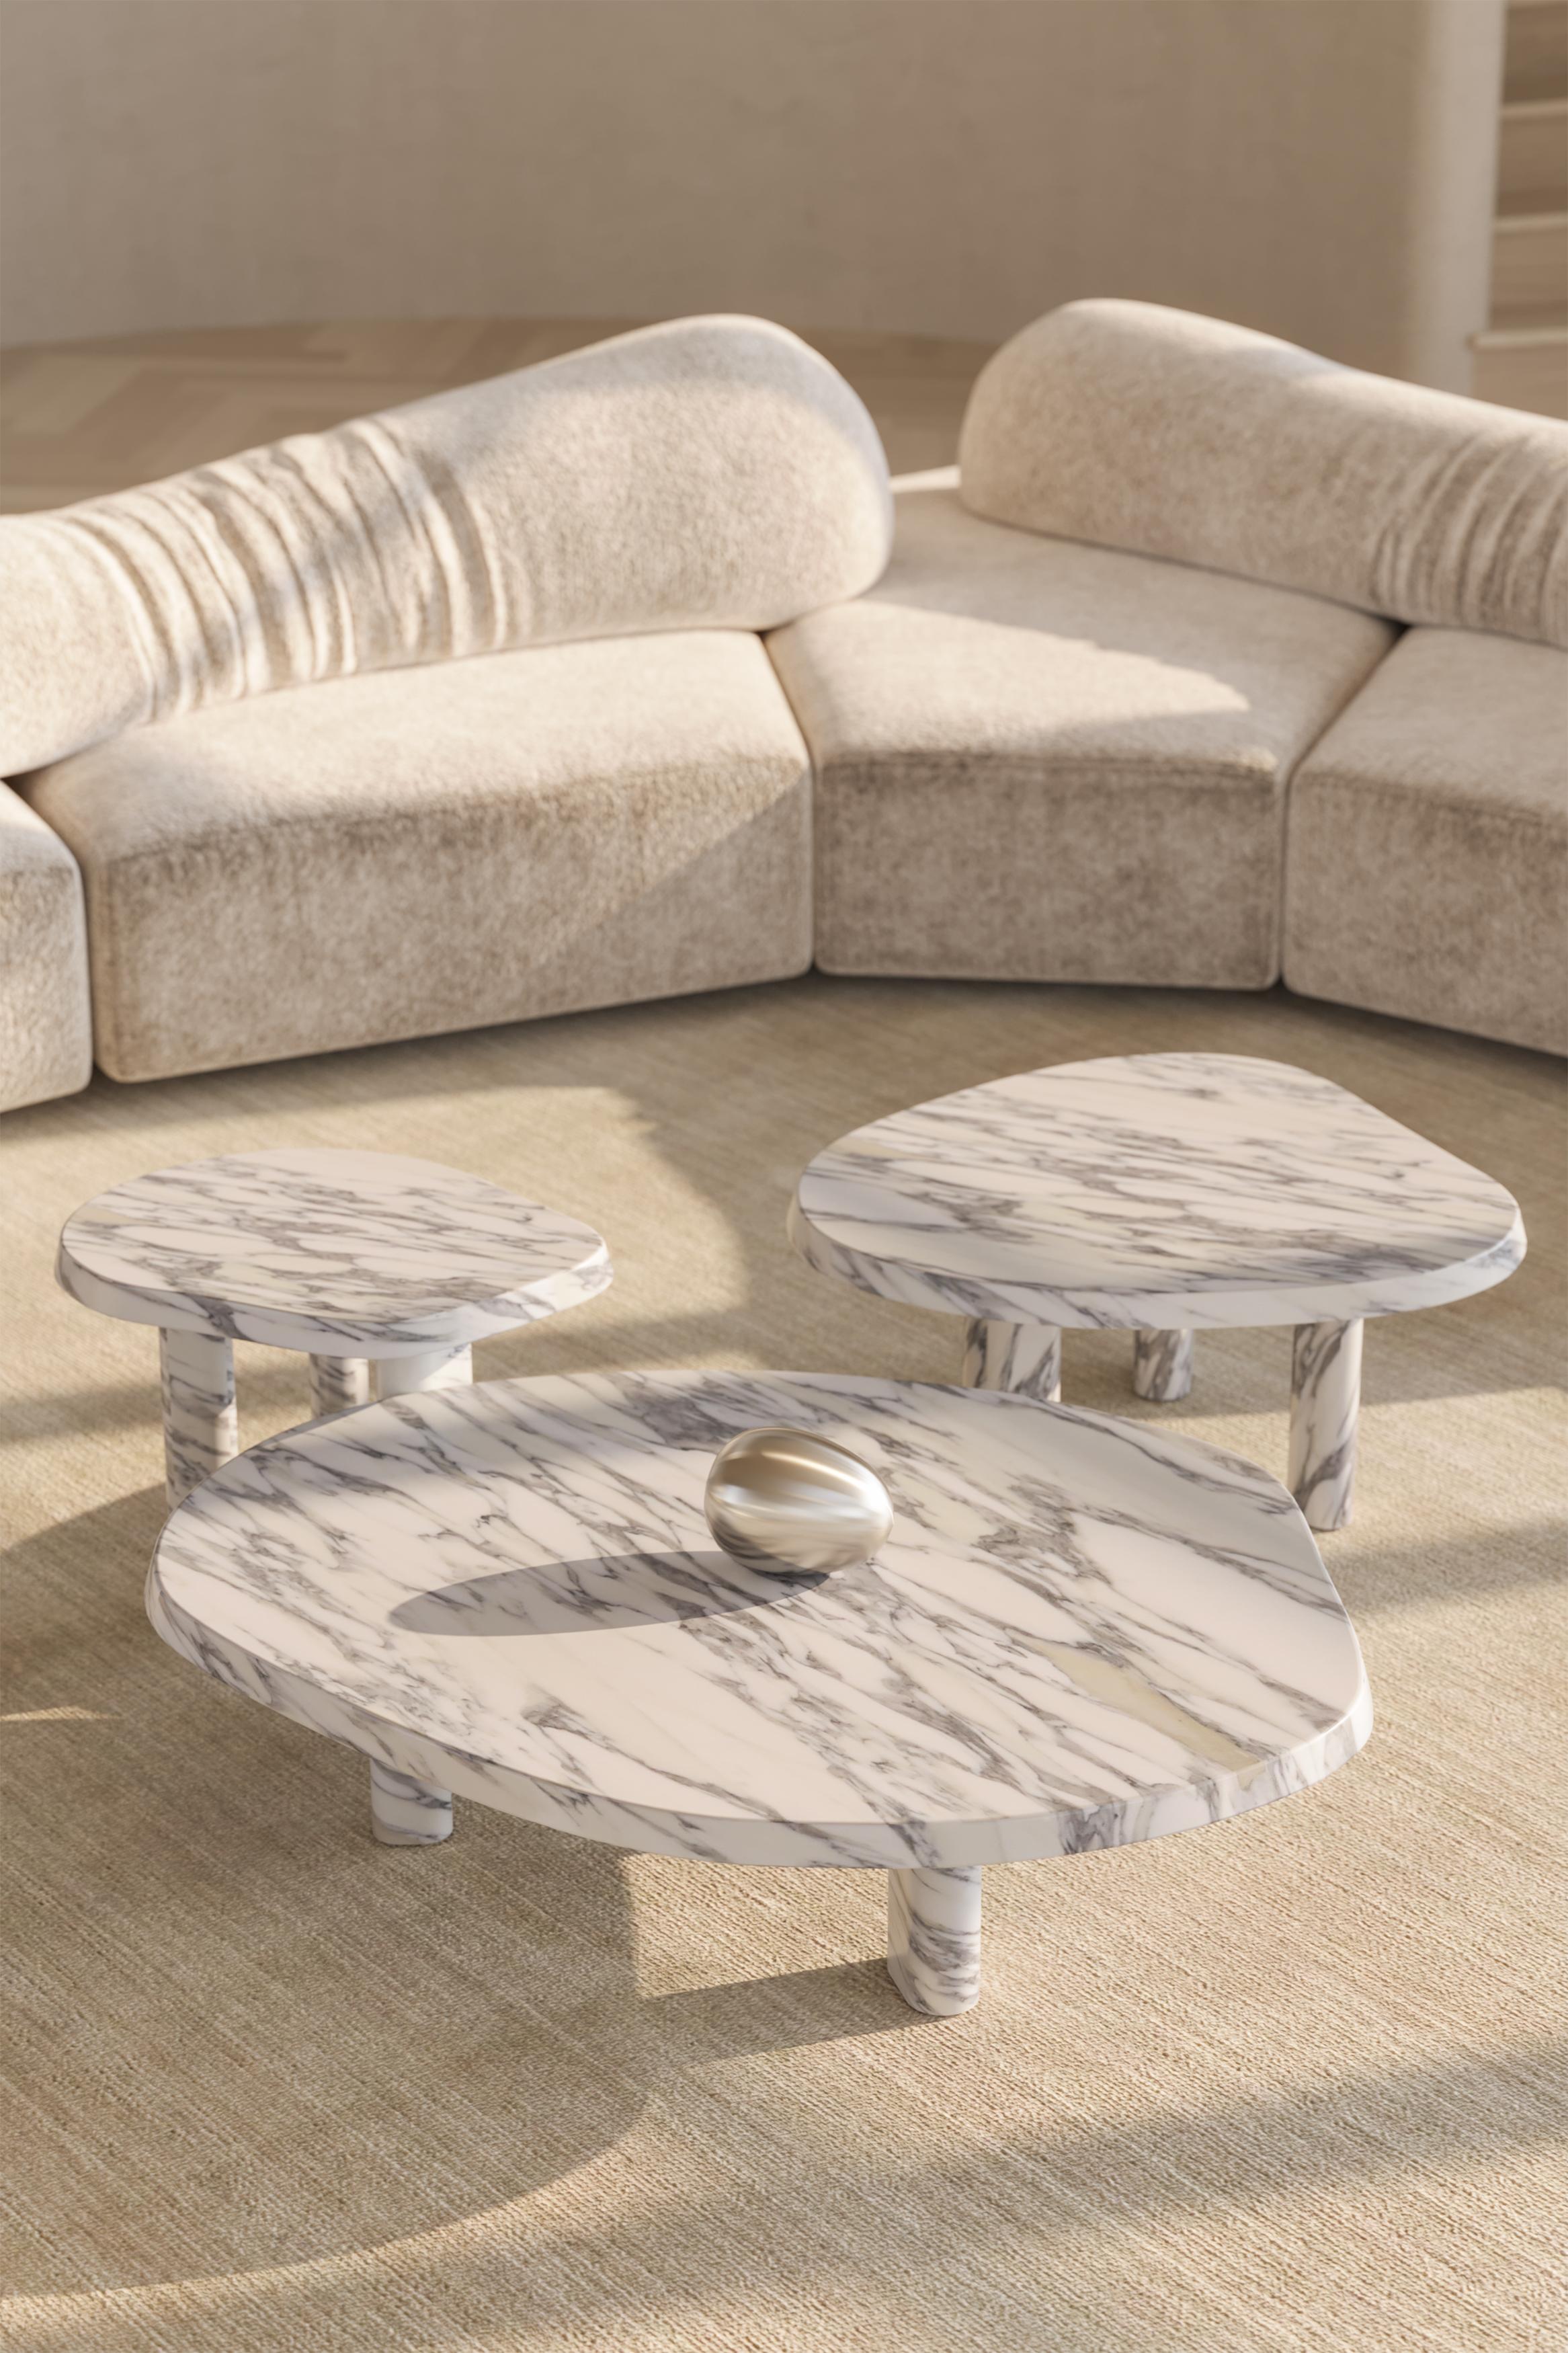 Australian Viola Calacatta Marble Full Set Fiori Nesting Coffee Table by the Essentialist For Sale